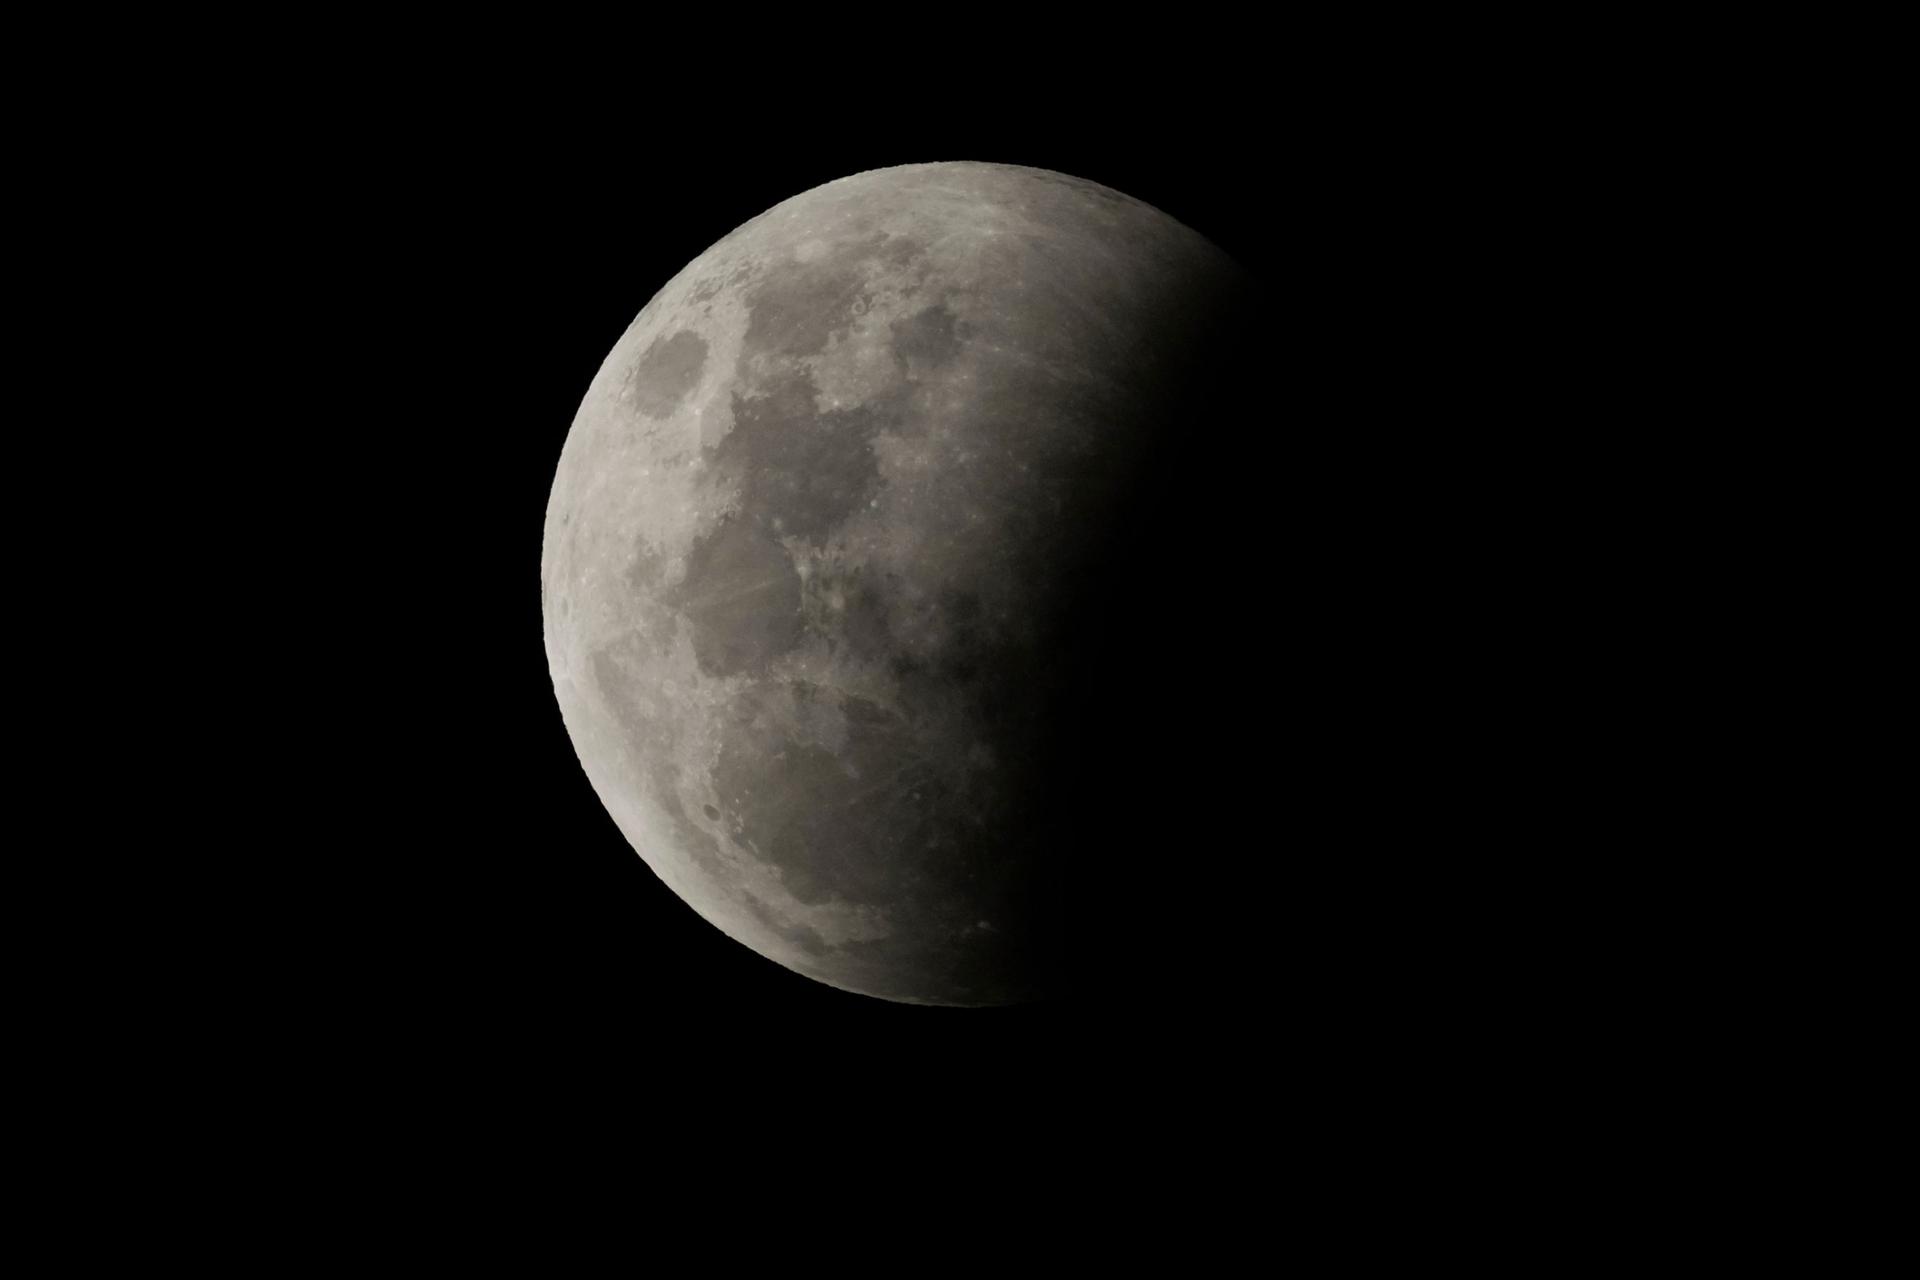 The beginning of a total lunar eclipse with a shadow on about 25% of the moon.